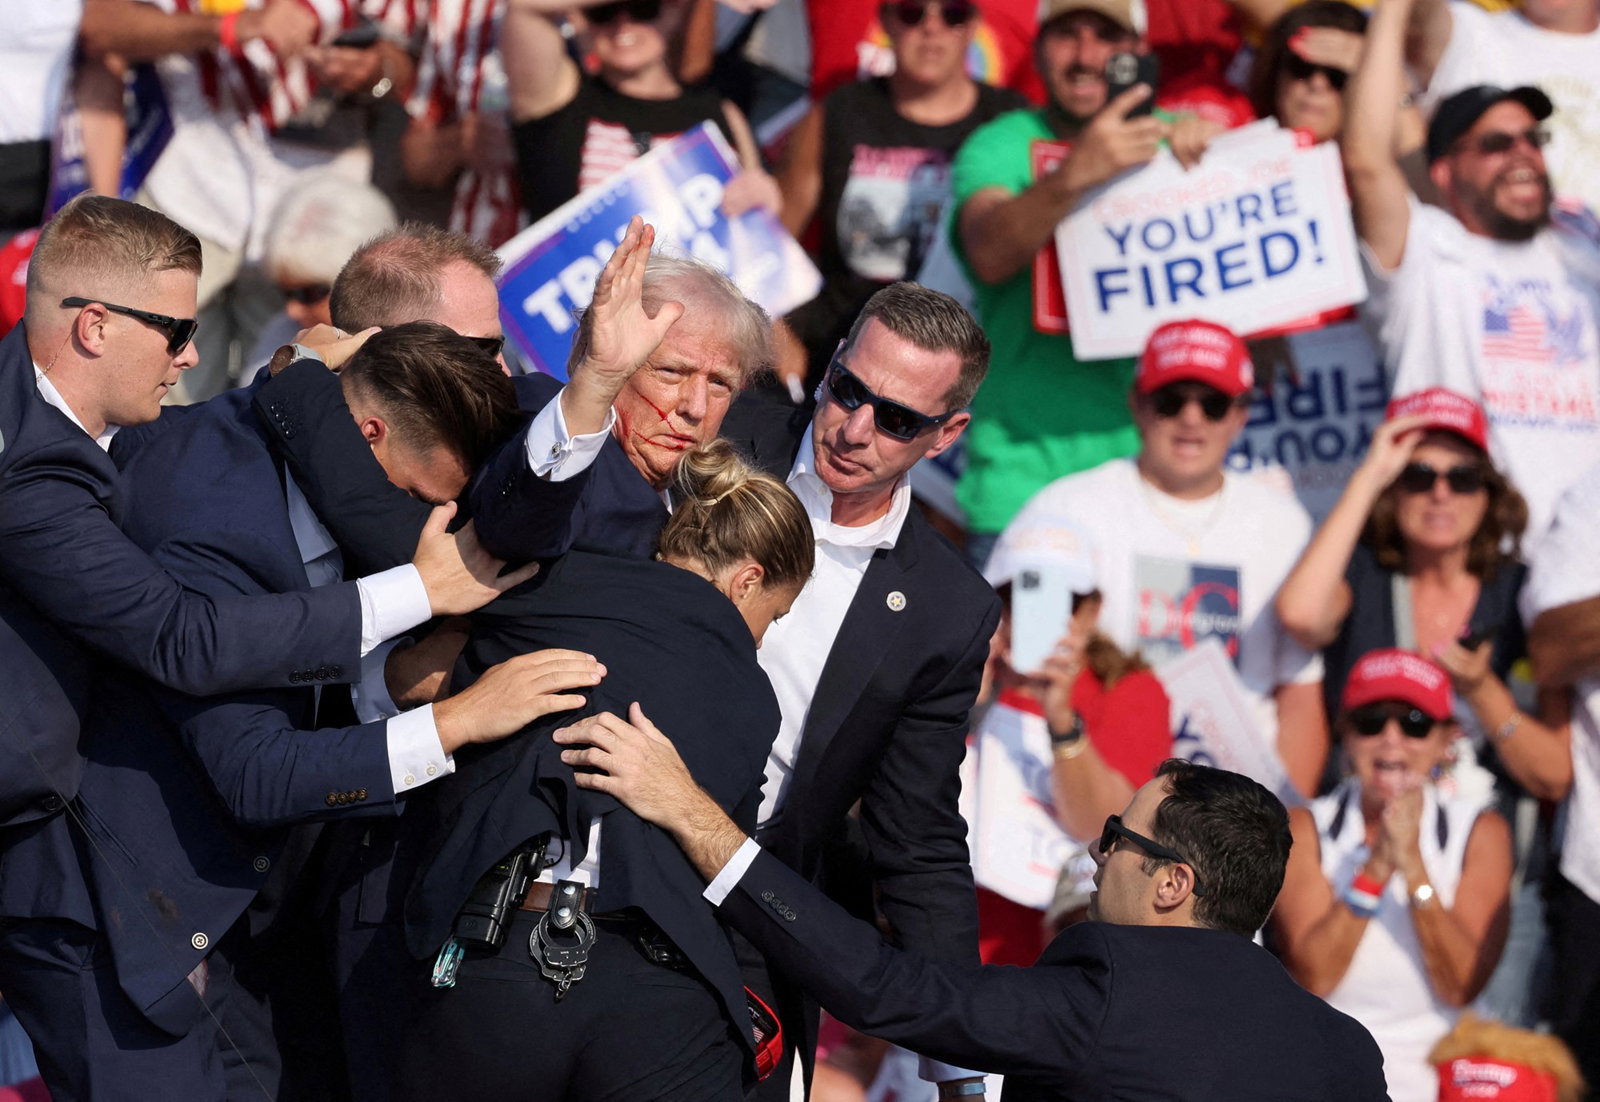 Secret Service agents haul Trump off the stage after a bullet skims his ear